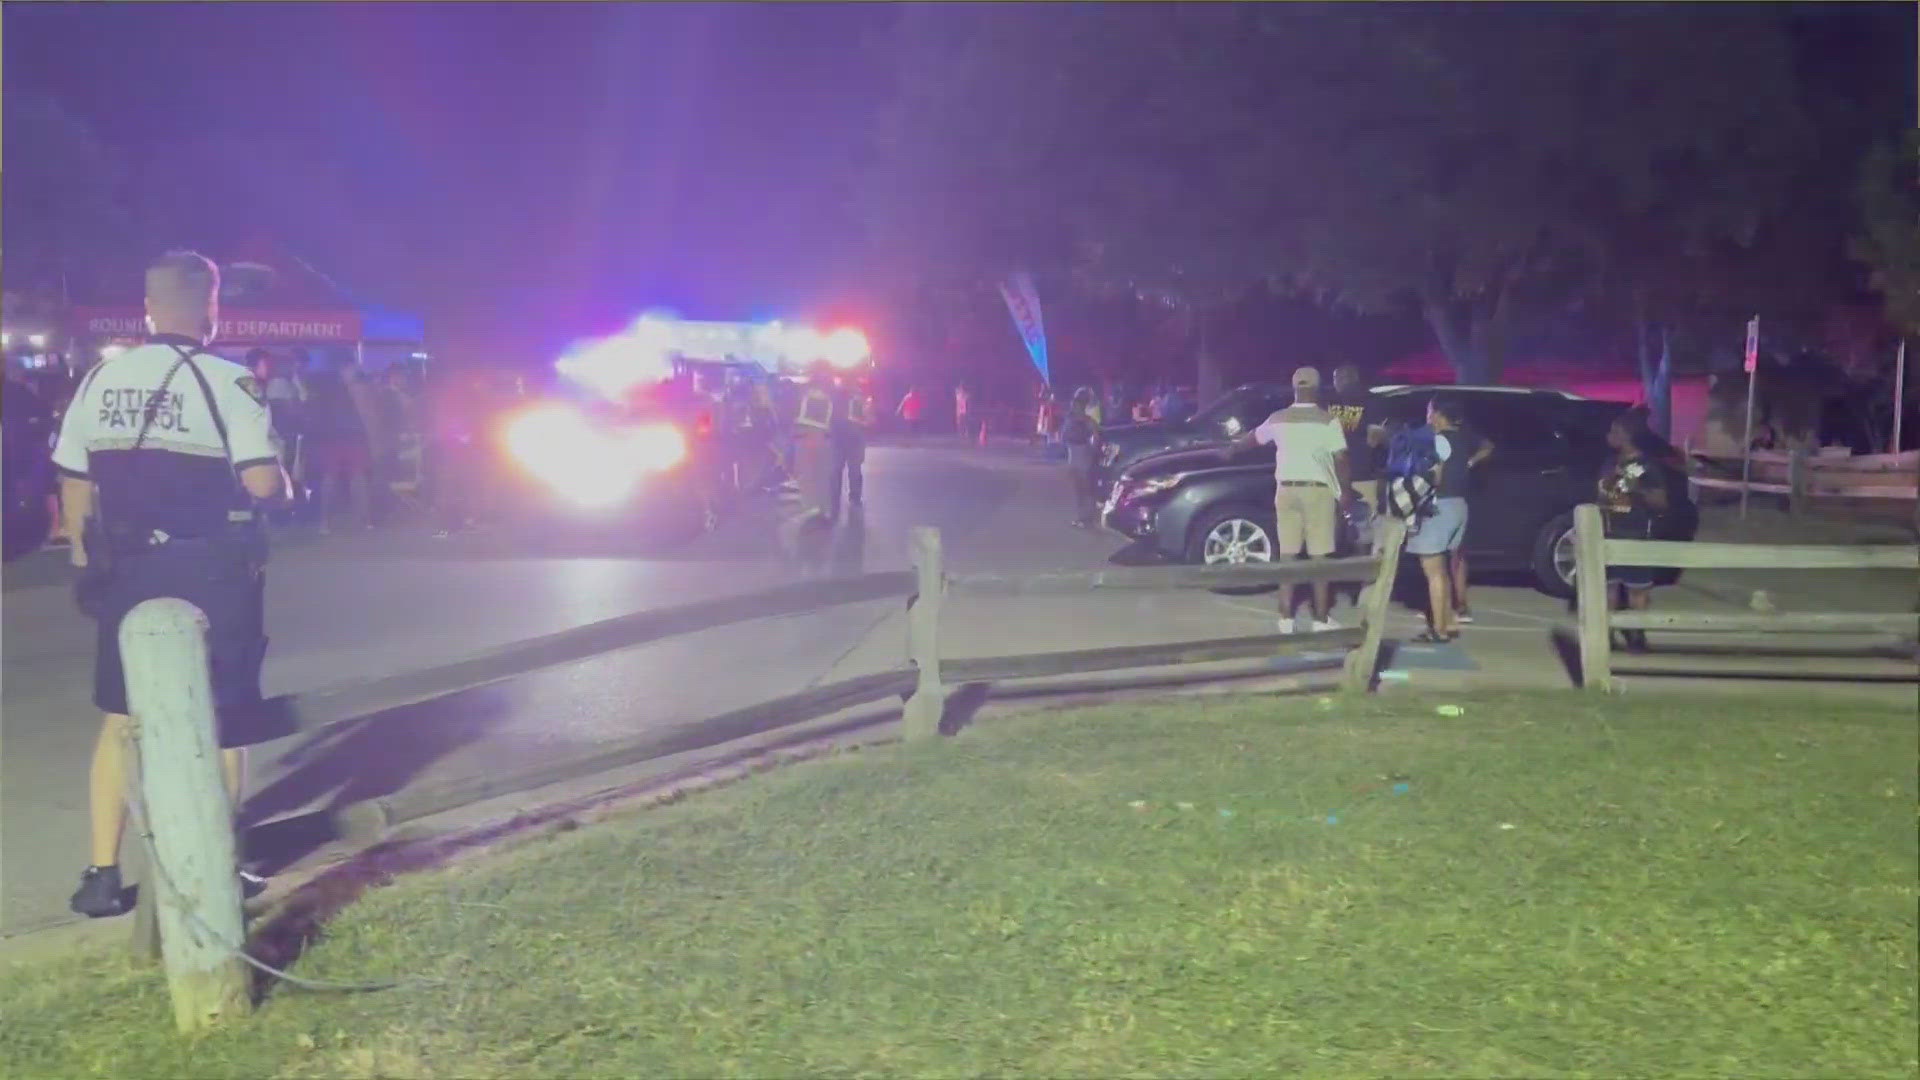 At least two people are dead and several are injured after a shooting at a Juneteenth event in Round Rock. The suspects are still at large.